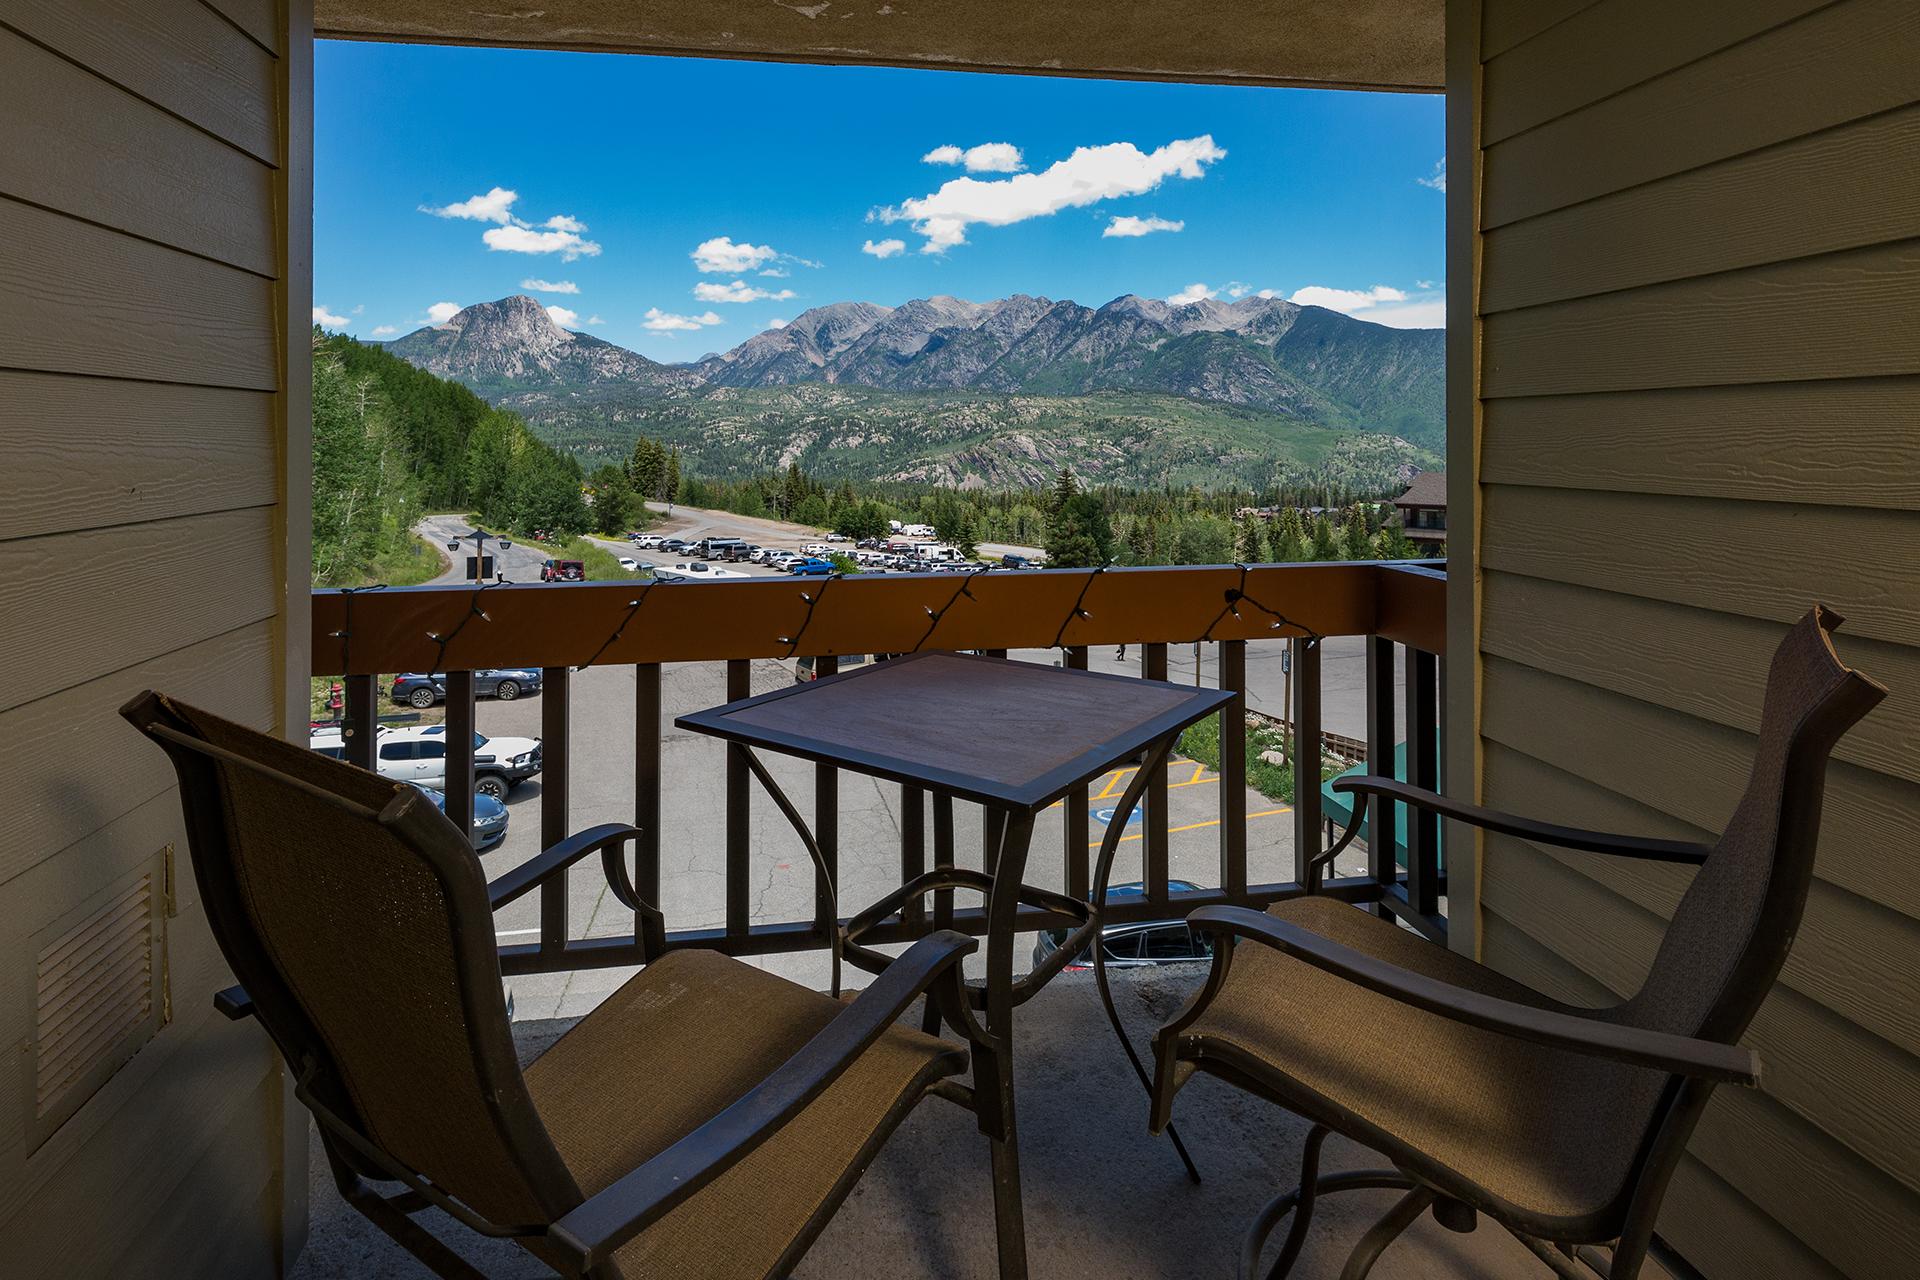 Awesome view of Spud Mountain and the Needles Range from the deck